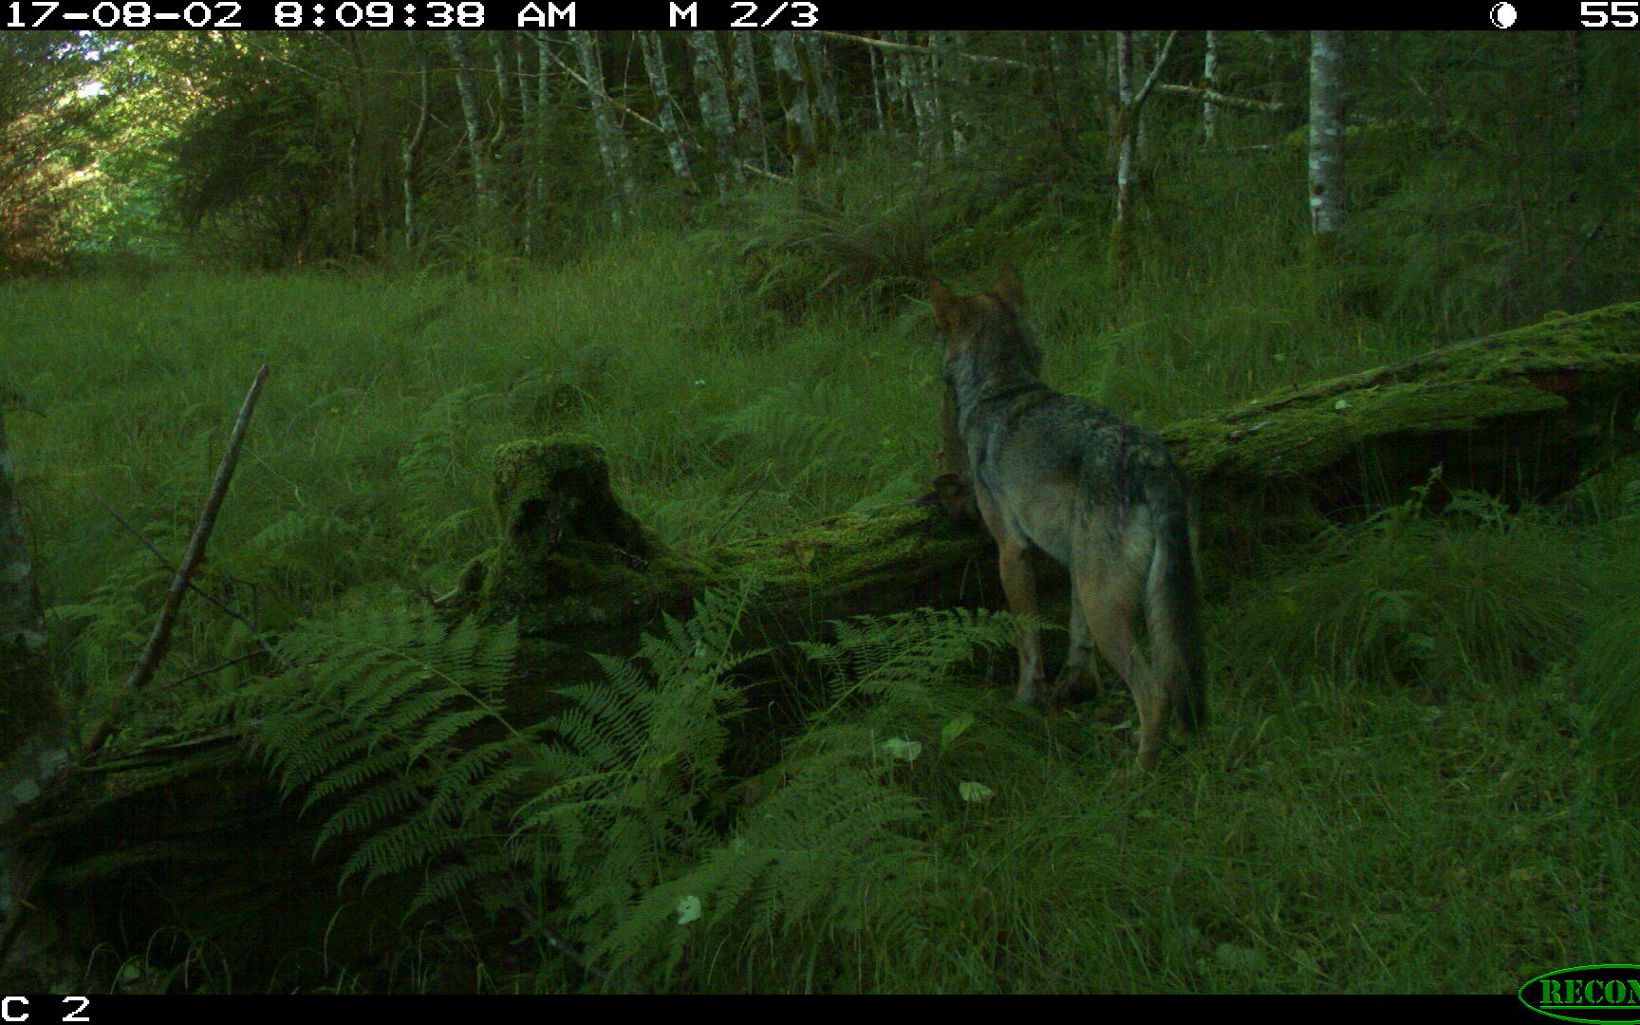 On the Hunt Wolf with prey captured on a trail camera in the study area. © TNC